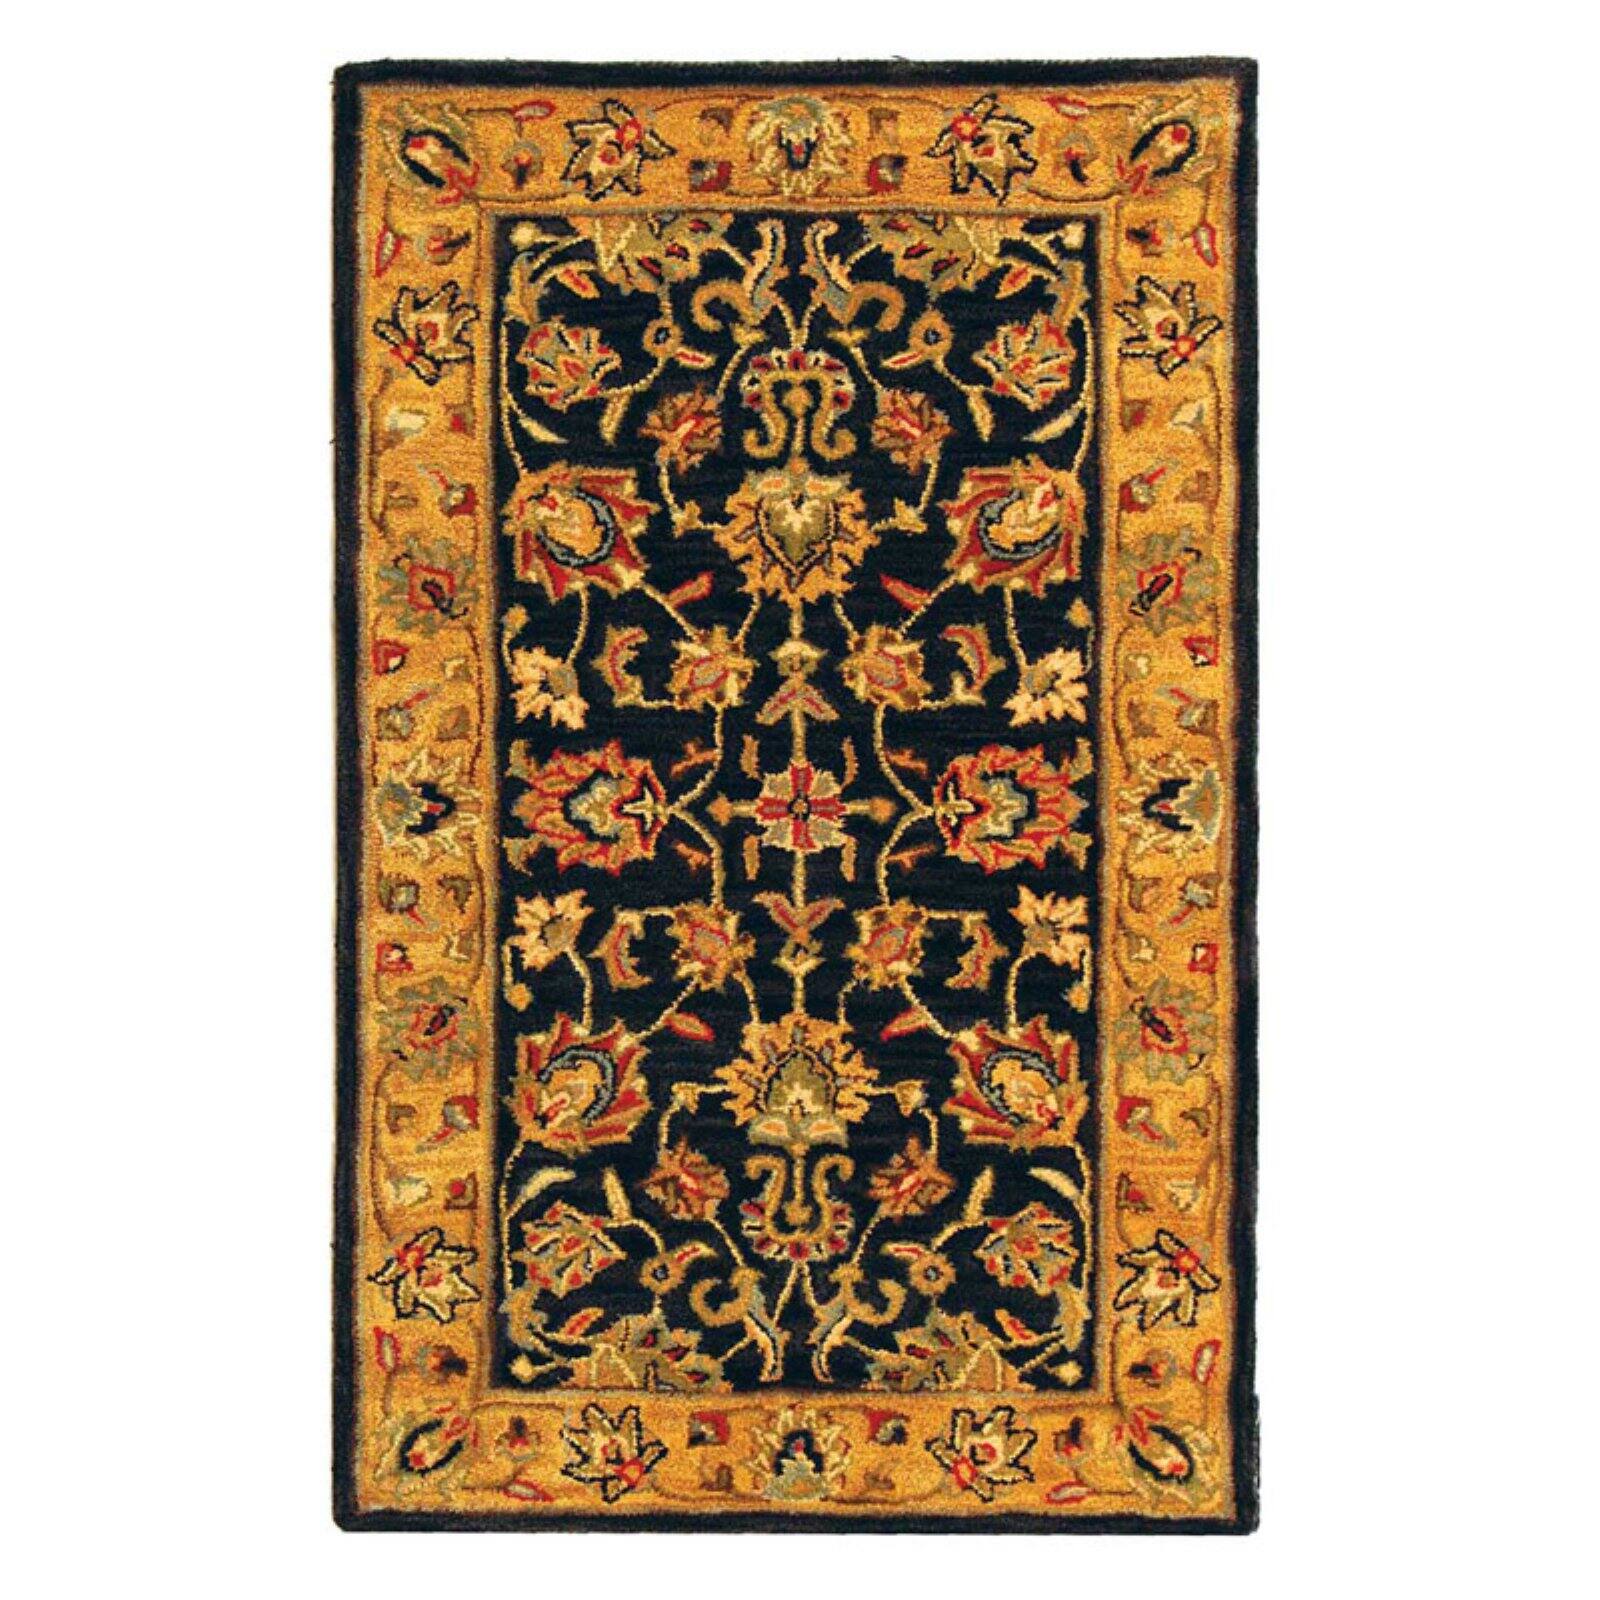 SAFAVIEH Heritage Regis Traditional Wool Area Rug, Charcoal/Gold, 2'3" x 4' - image 5 of 10